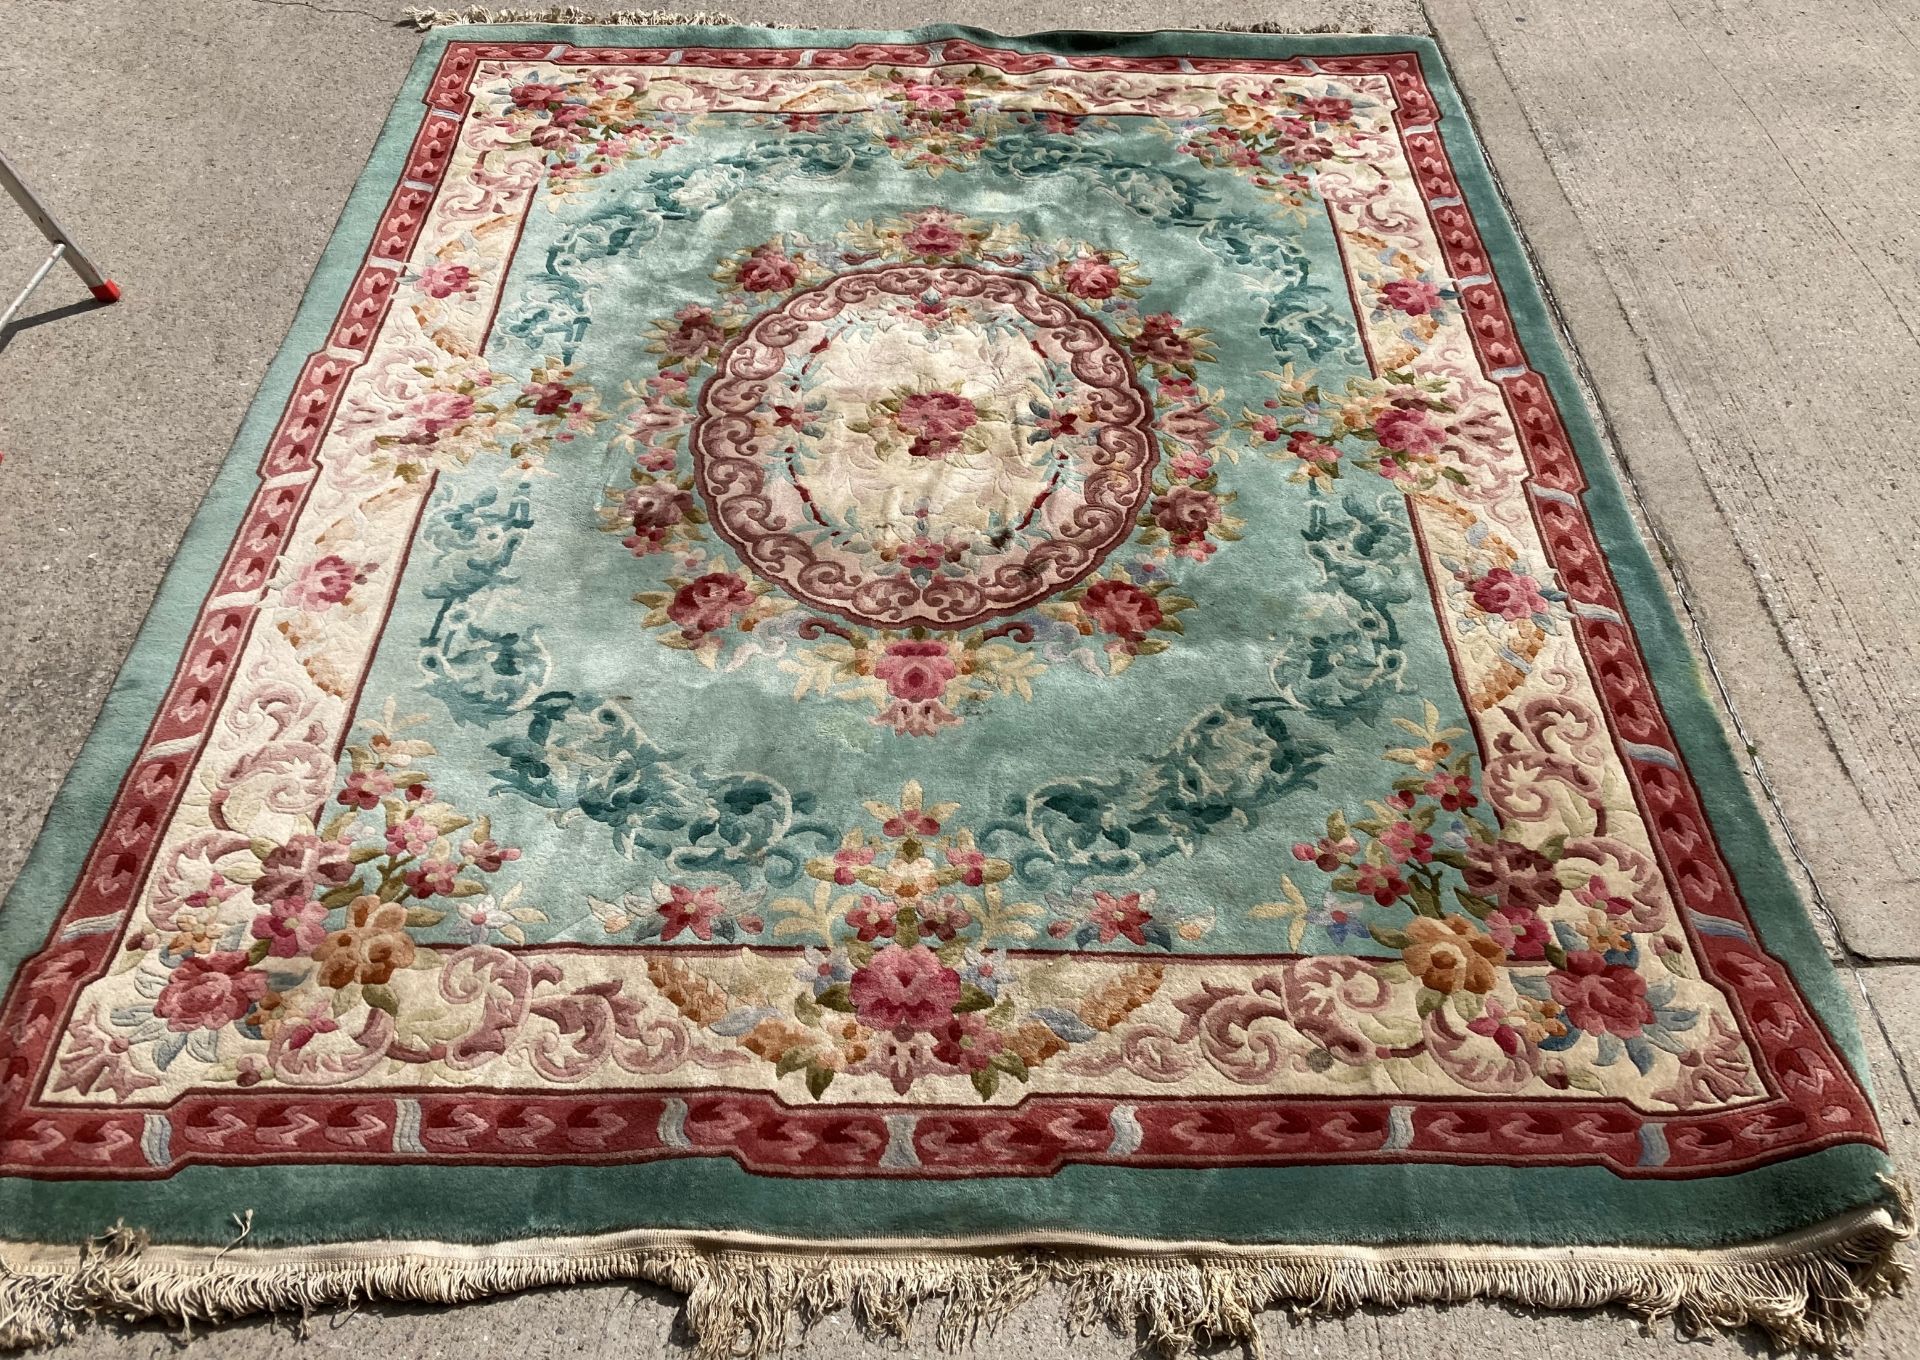 A green beige and pink patterned Chinese rug 275cm x 230cm